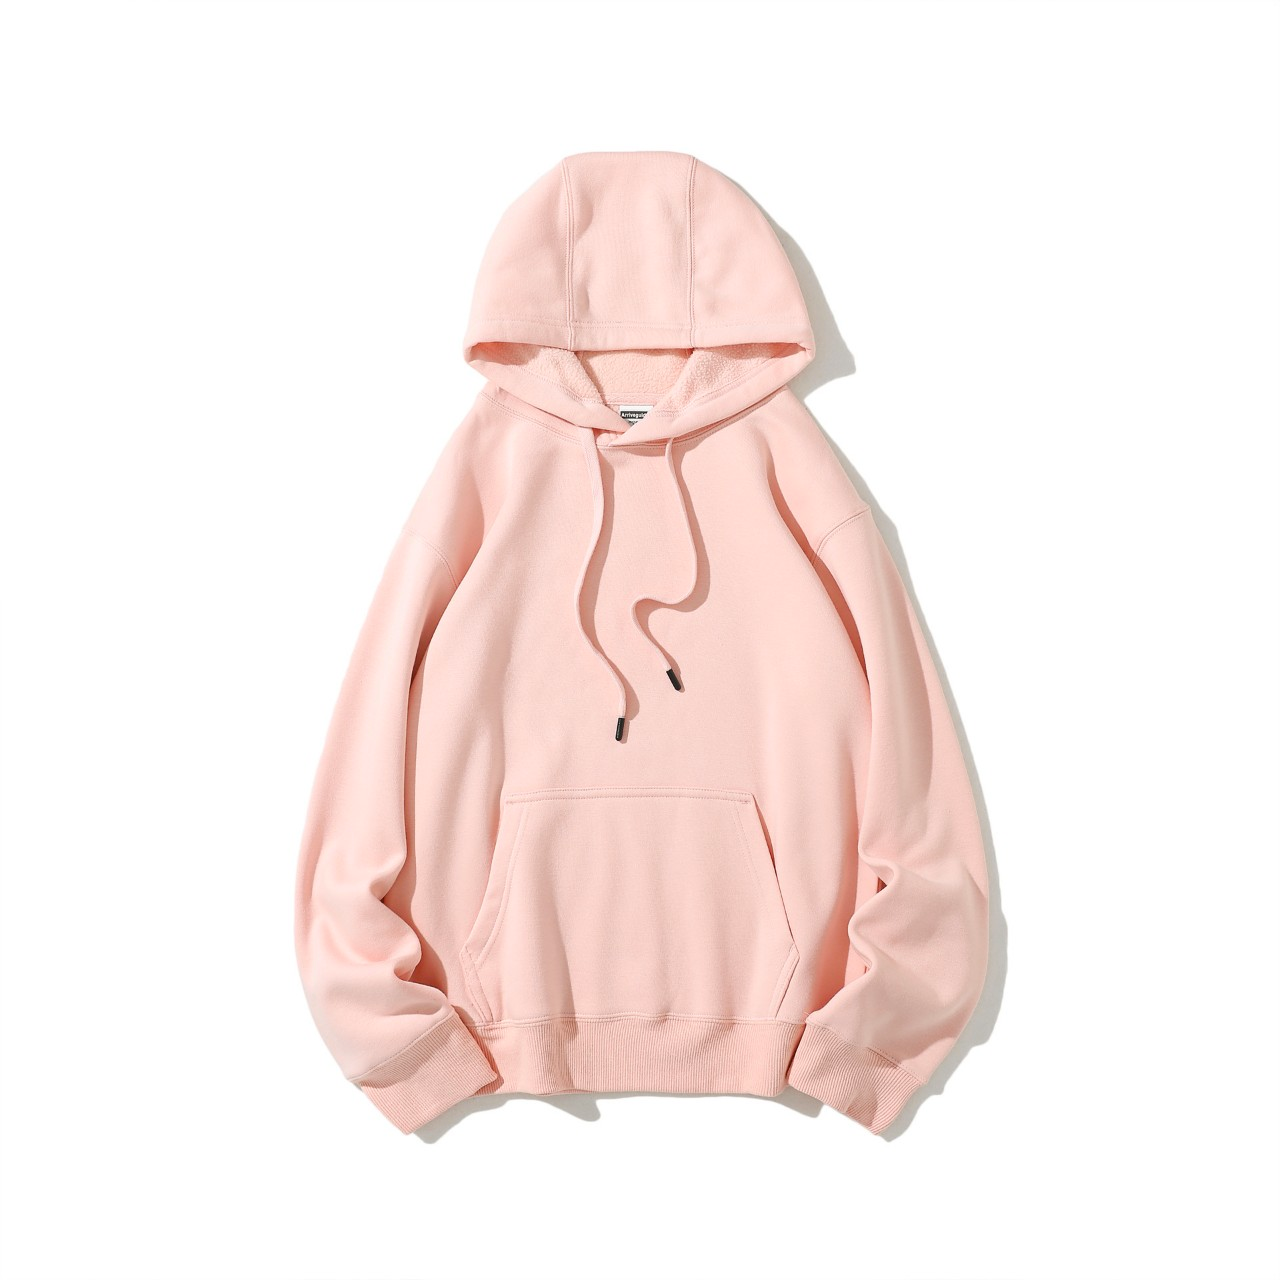 hoodie size 4xl color pink